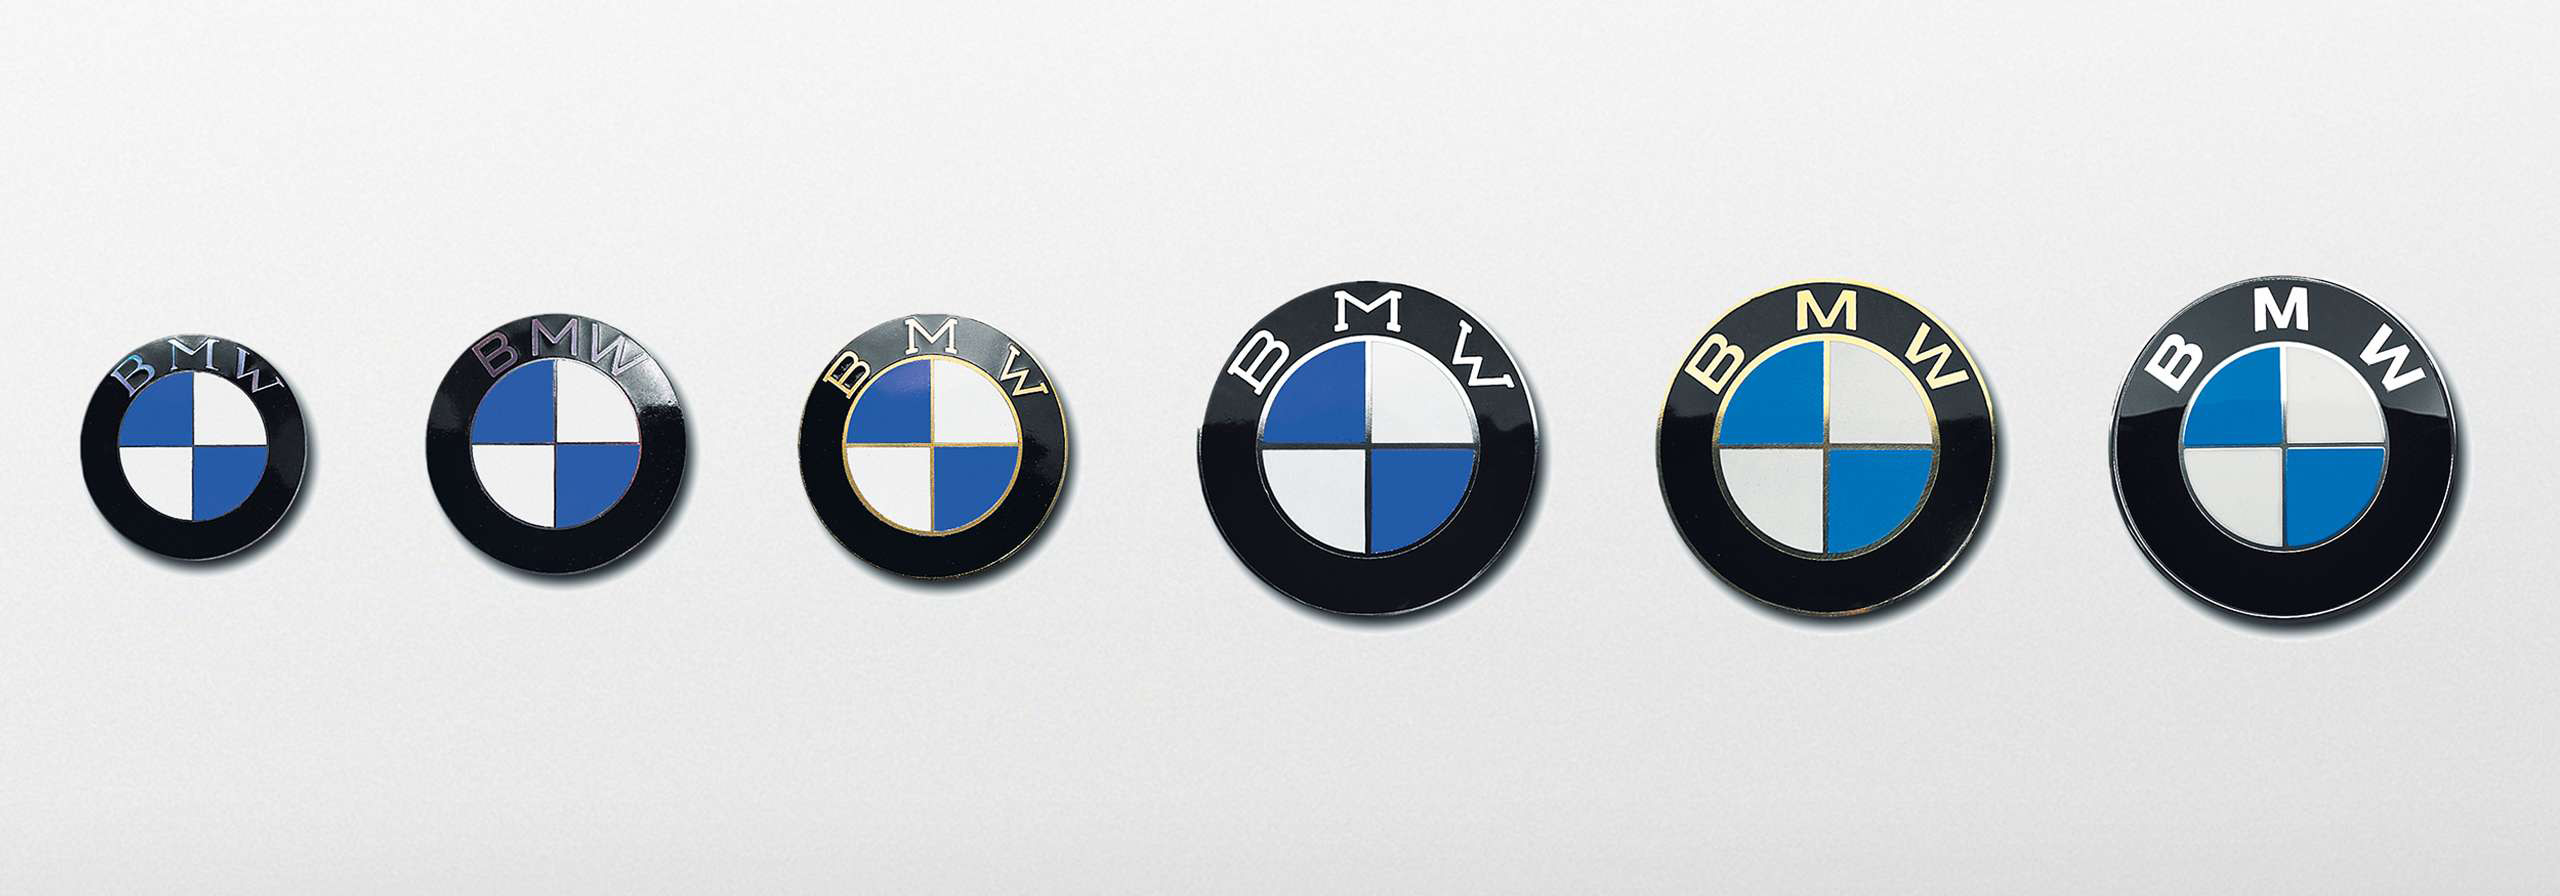 How the BMW name was created